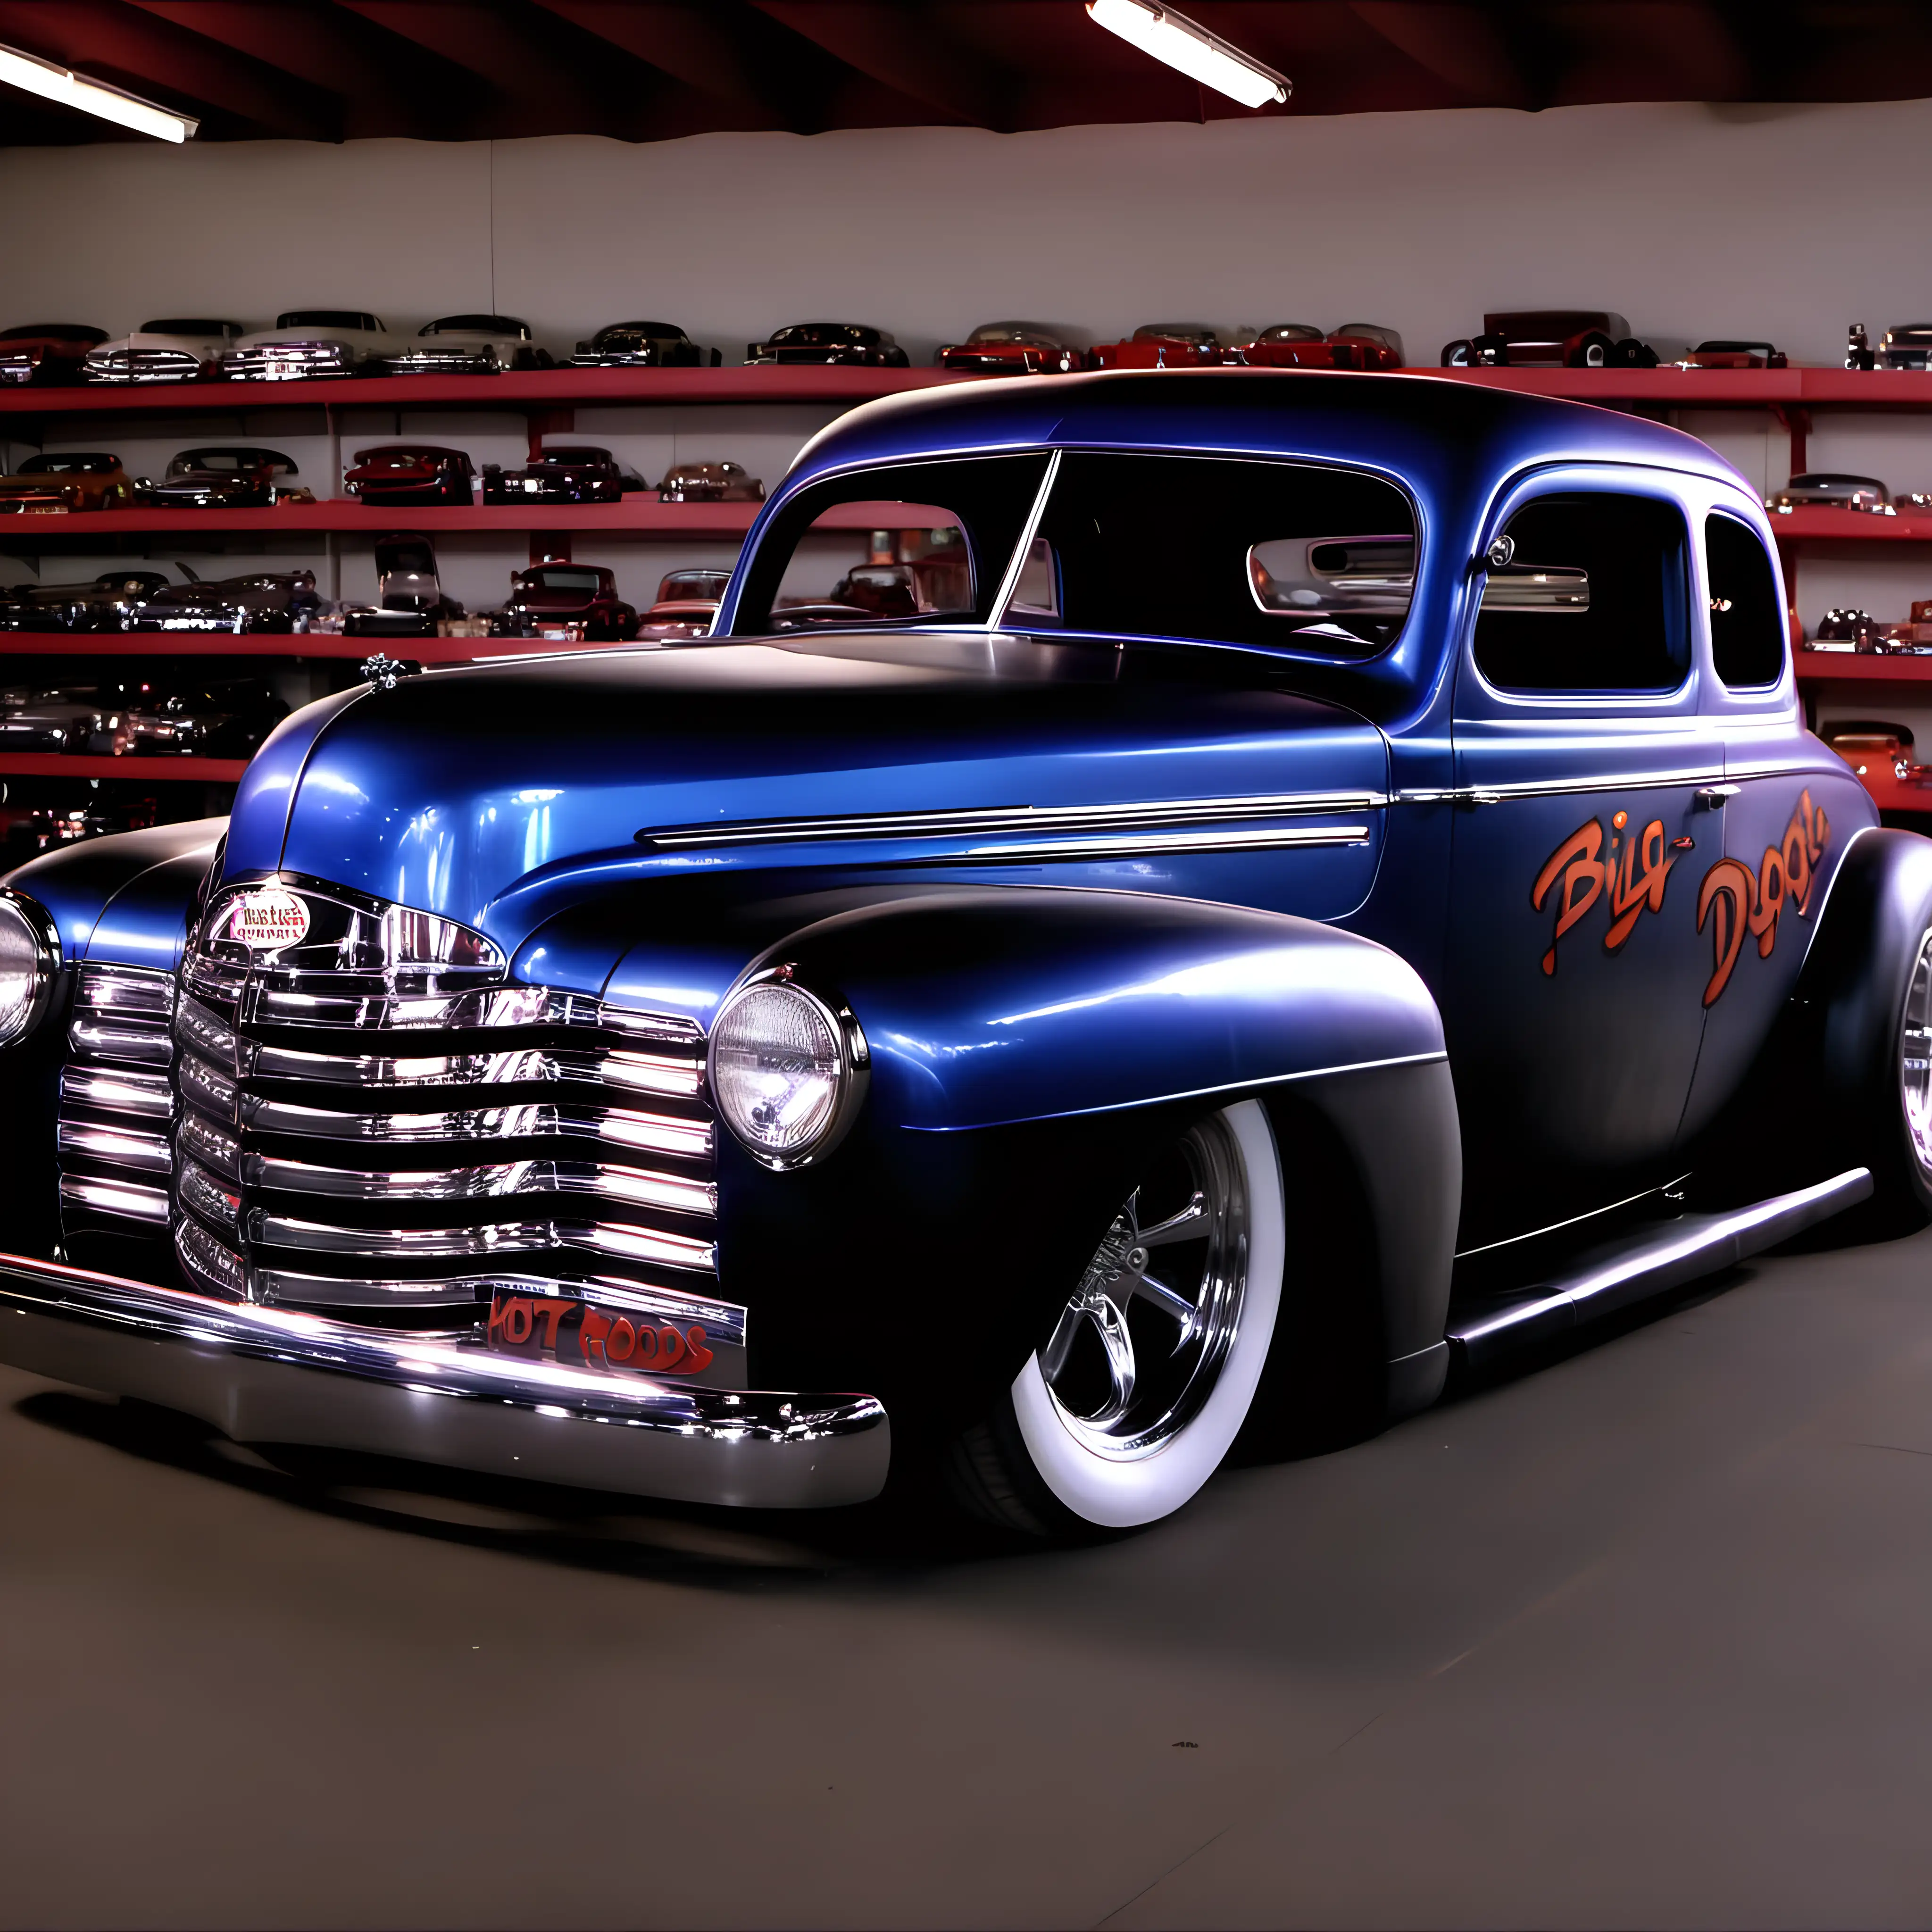 Vibrant Hot Rods Display at Big Doggs House of Hot Rods 16K Full HD